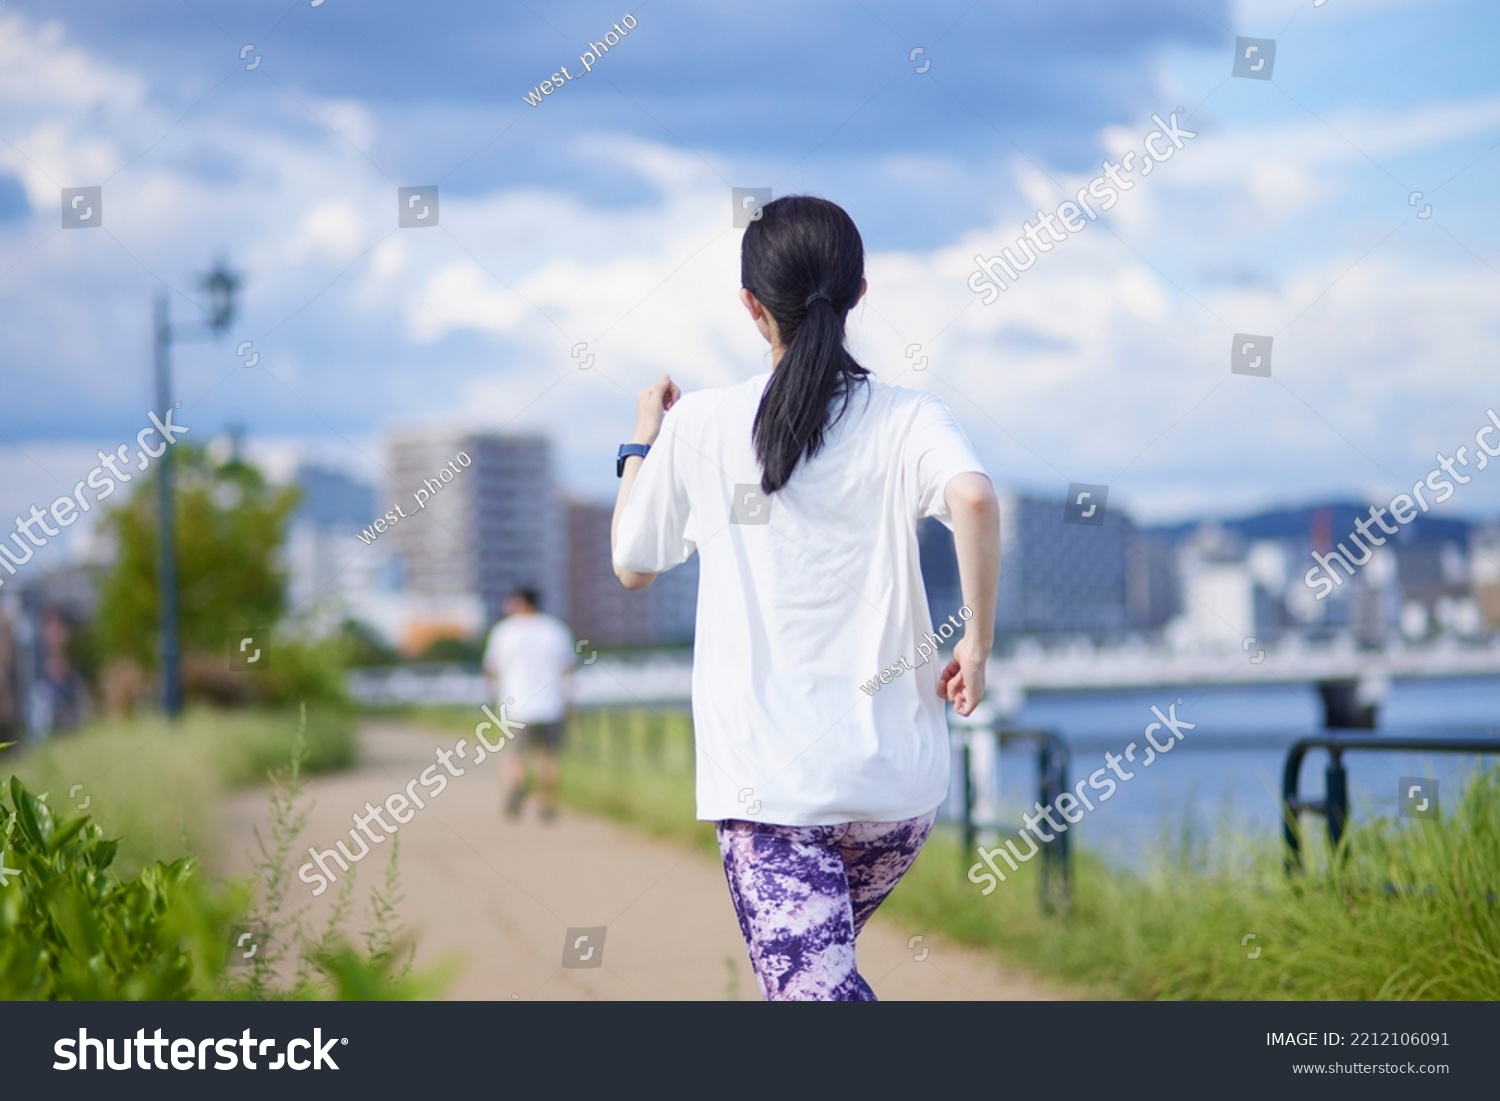 Young Japanese woman exercising outdoors #2212106091